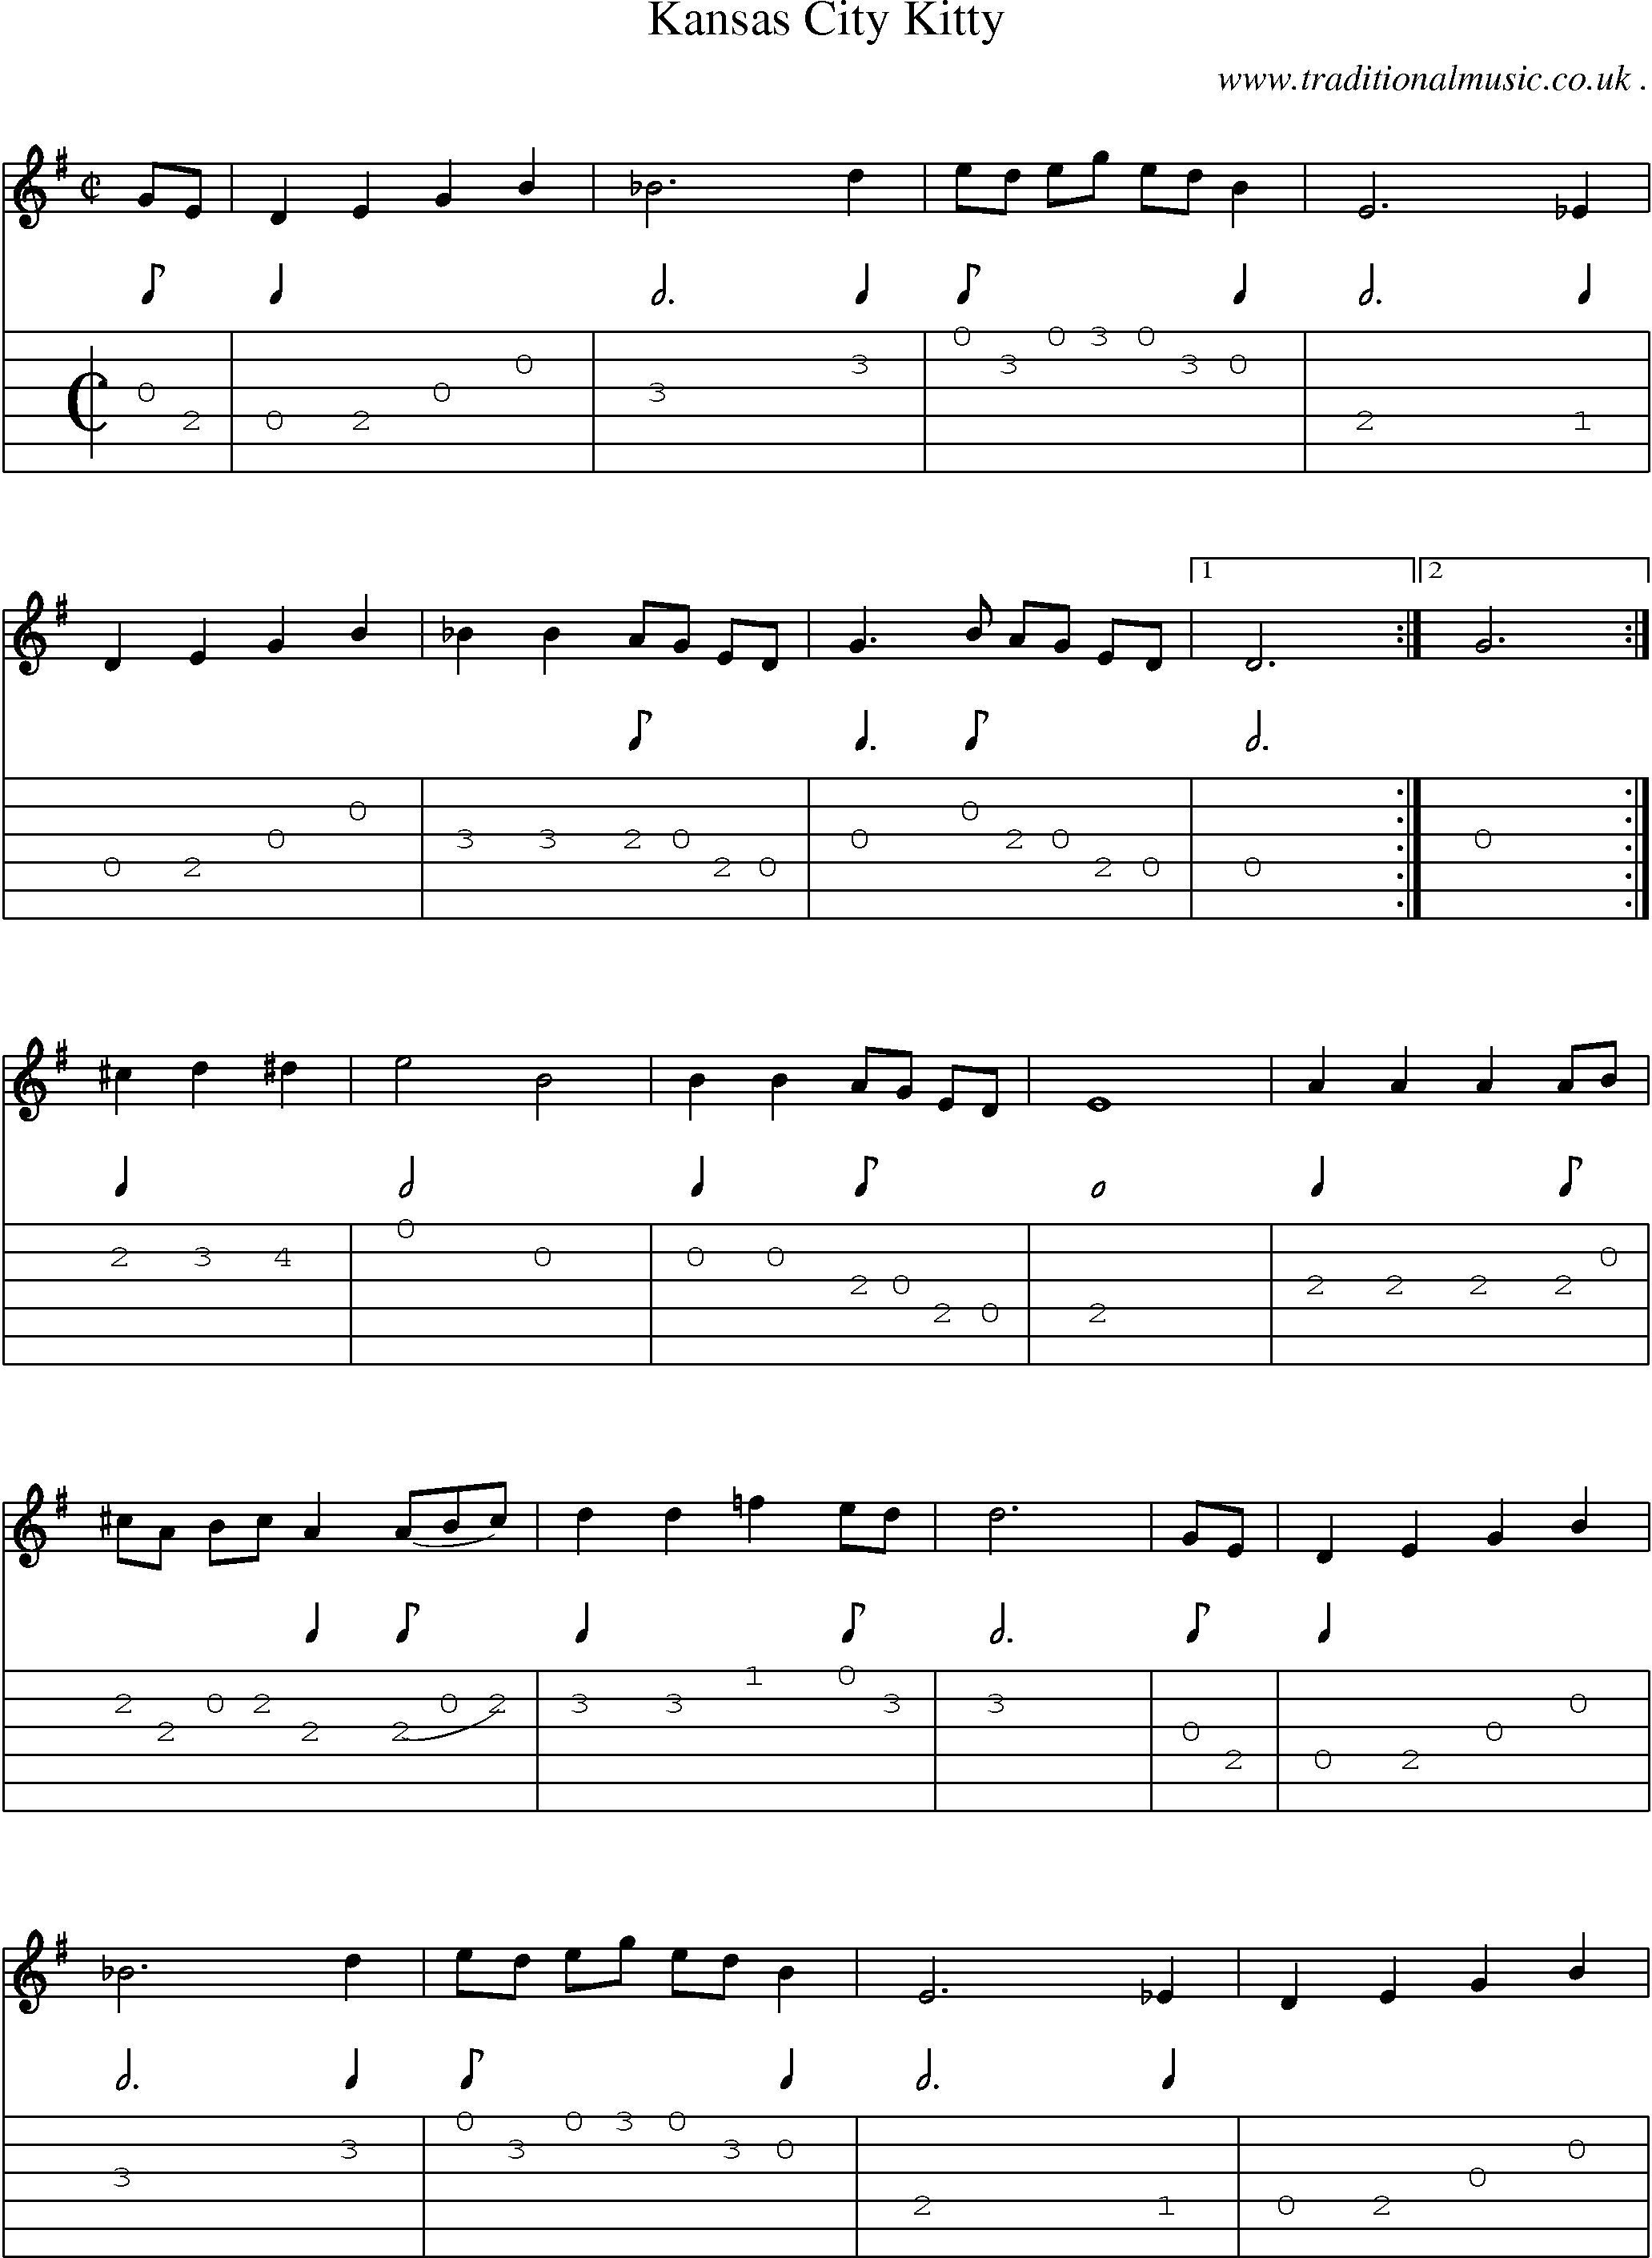 Music Score and Guitar Tabs for Kansas City Kitty